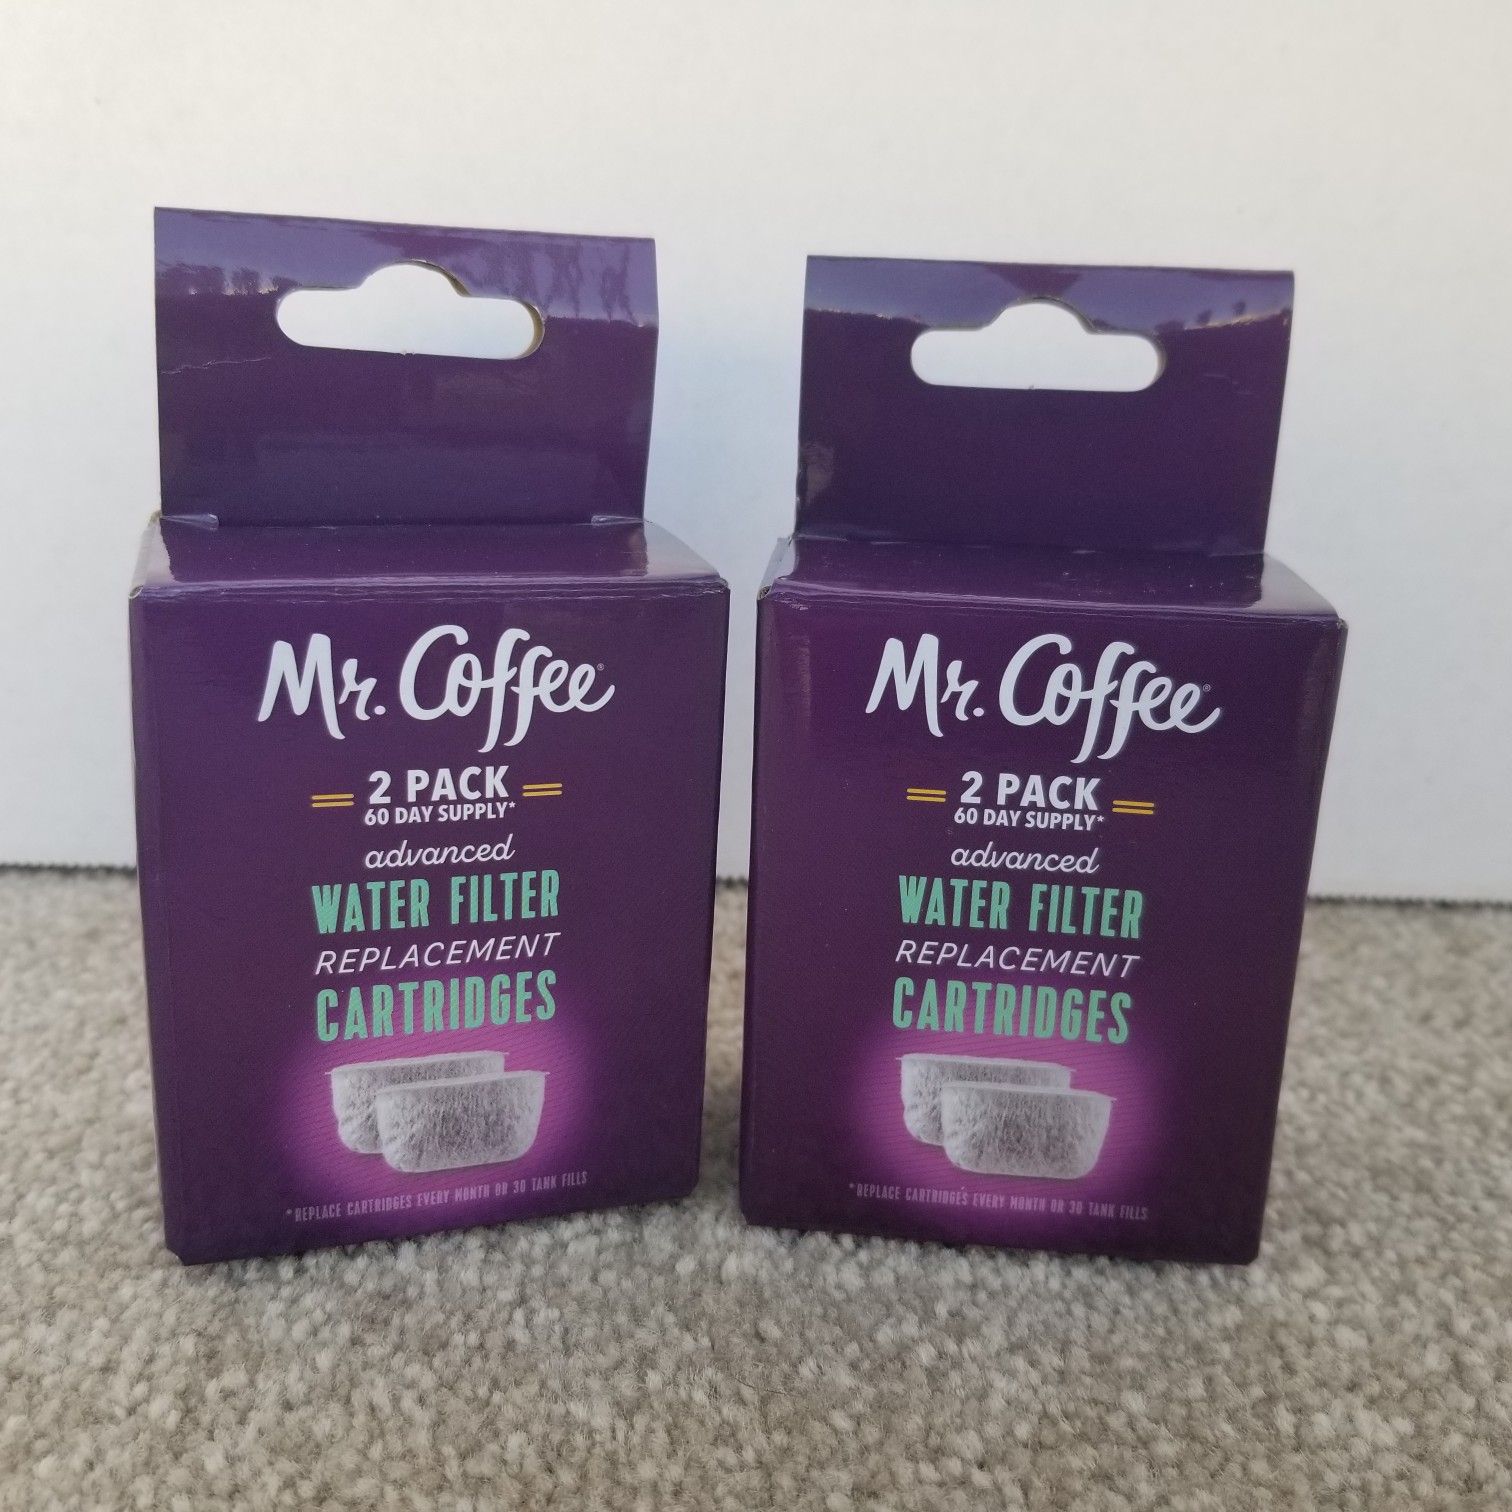 New Mr. Coffee Advanced Water Filter Replacement Cartridges Lot Of 2 - 120 Day Supply